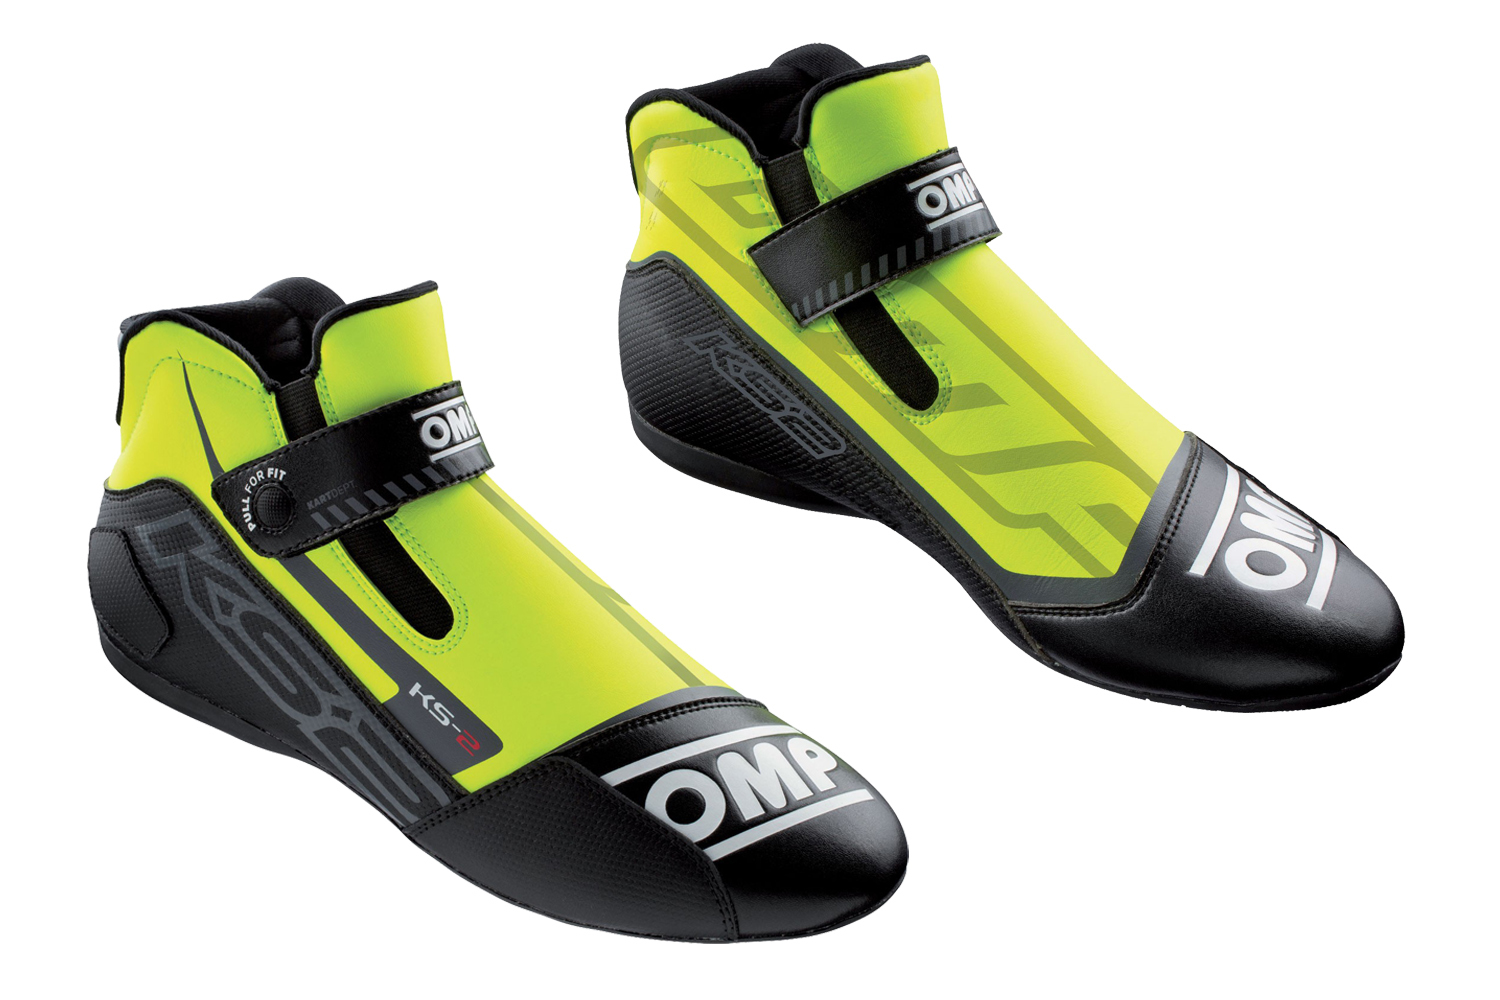 OMP Racing IC82505939 - Shoe, KS-2, Driving, Mid-Top, FIA Approved, Suede Leather Outer, Fire Retardant Fabric Inner, Fluorescent Yellow / Black, Euro Size 39, Pair